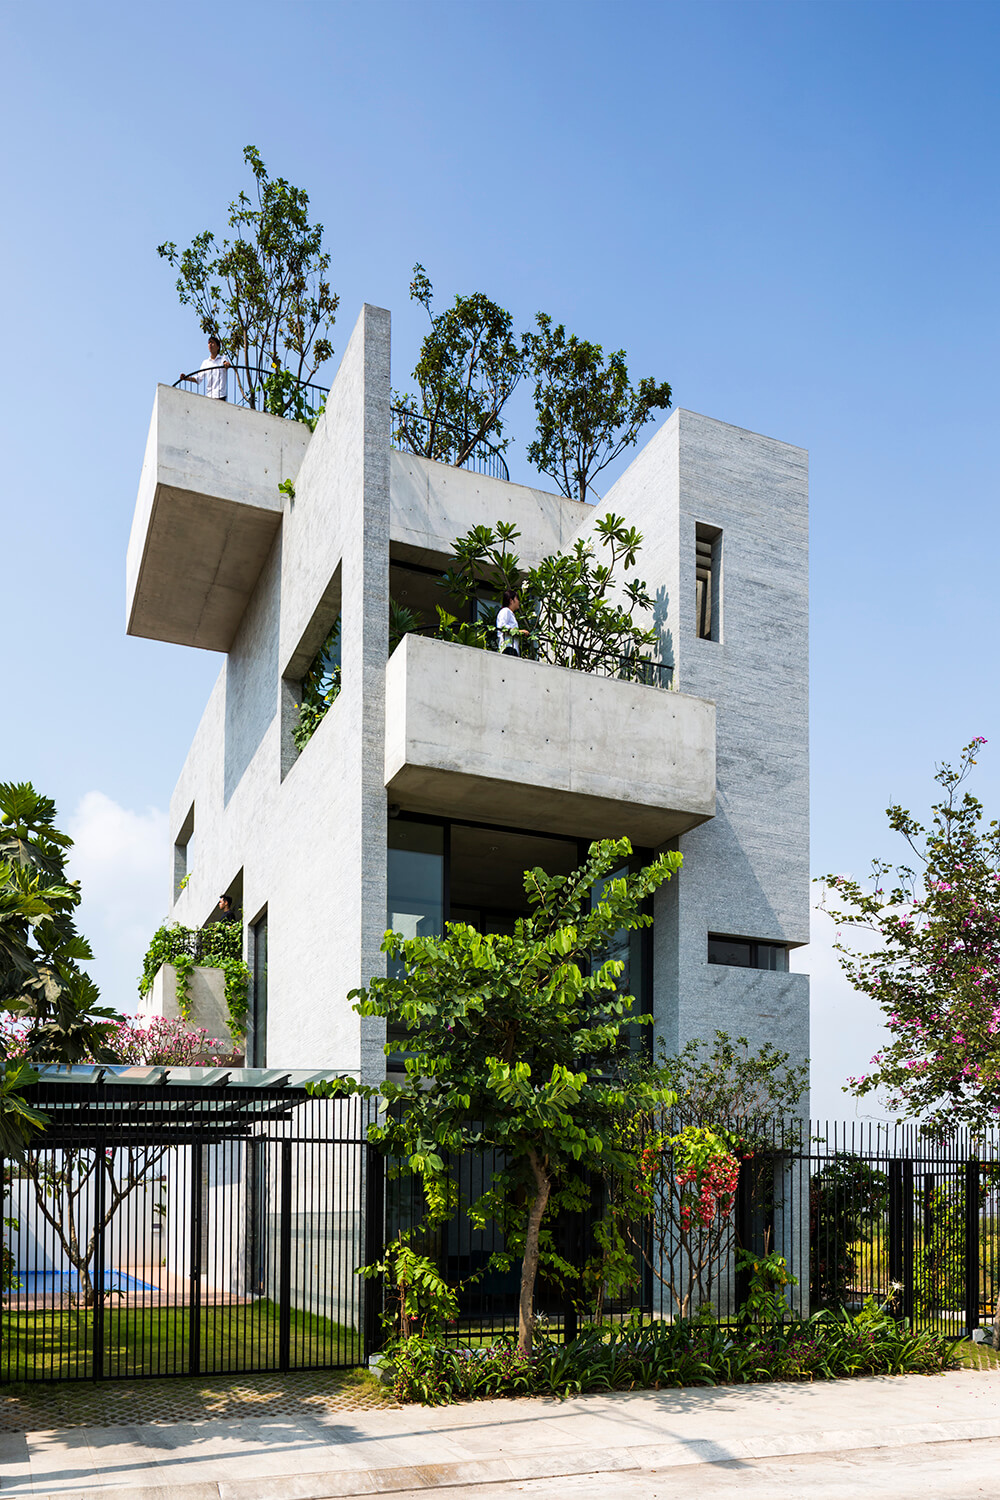 Striking concrete building with lush landscaping, featuring balconies and modern architectural elements.